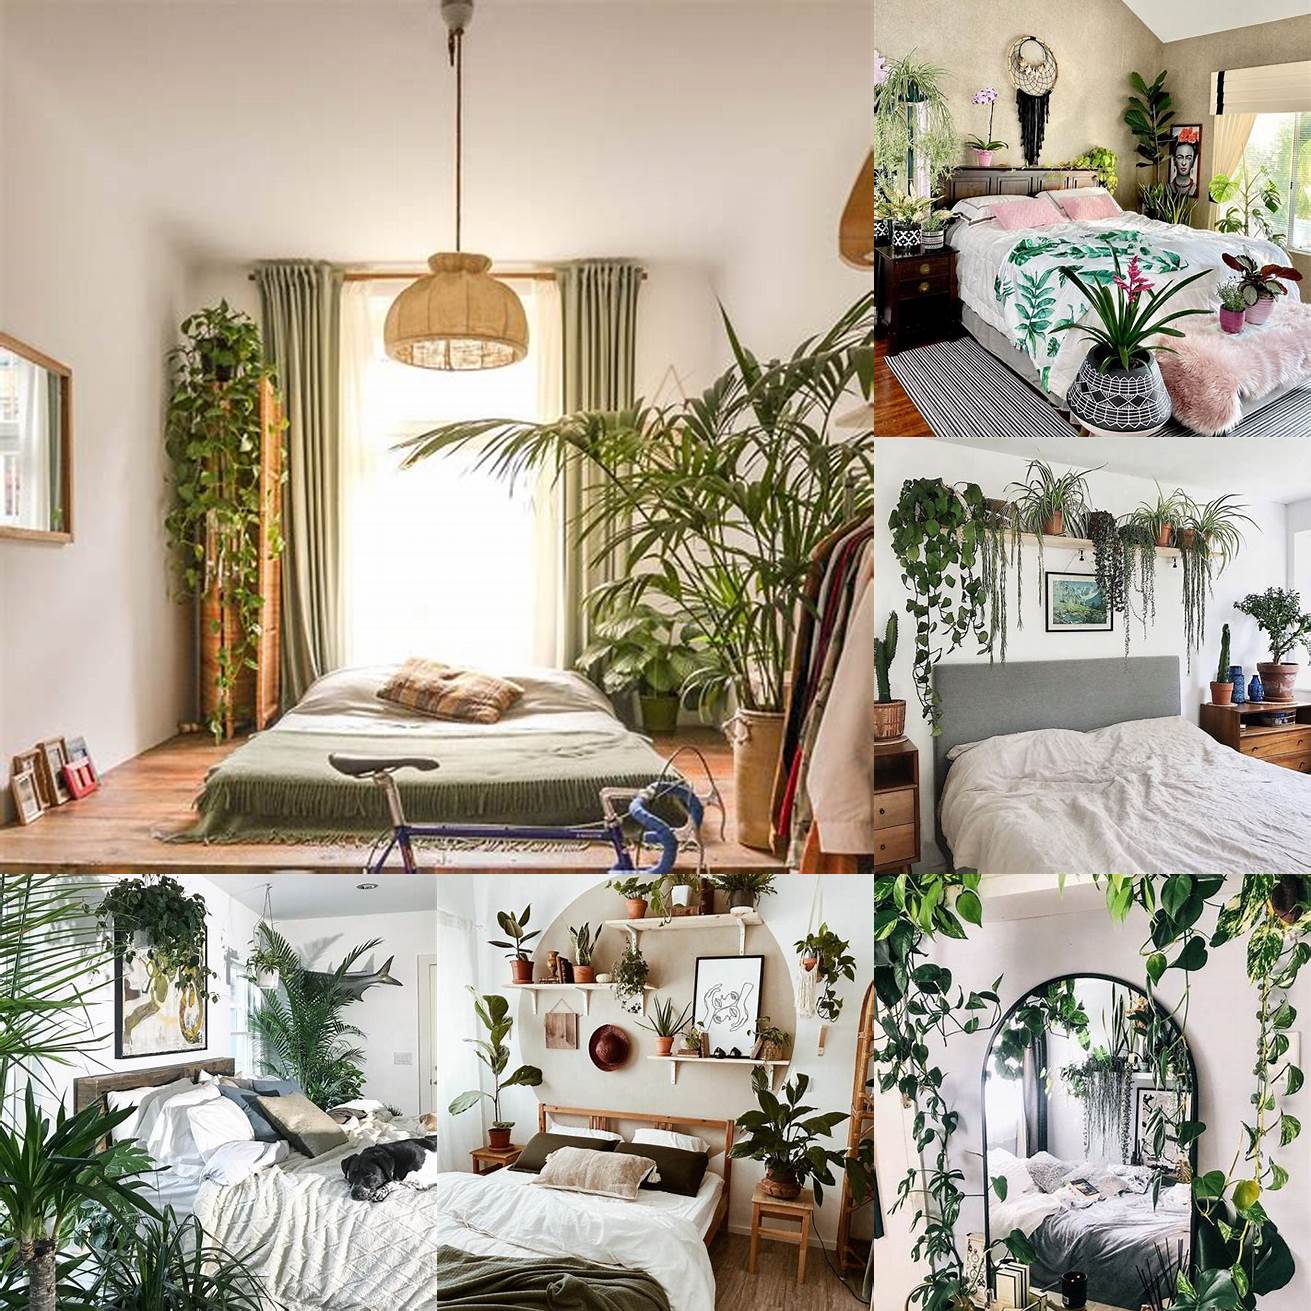 Add some life to your bedroom with plants and greenery